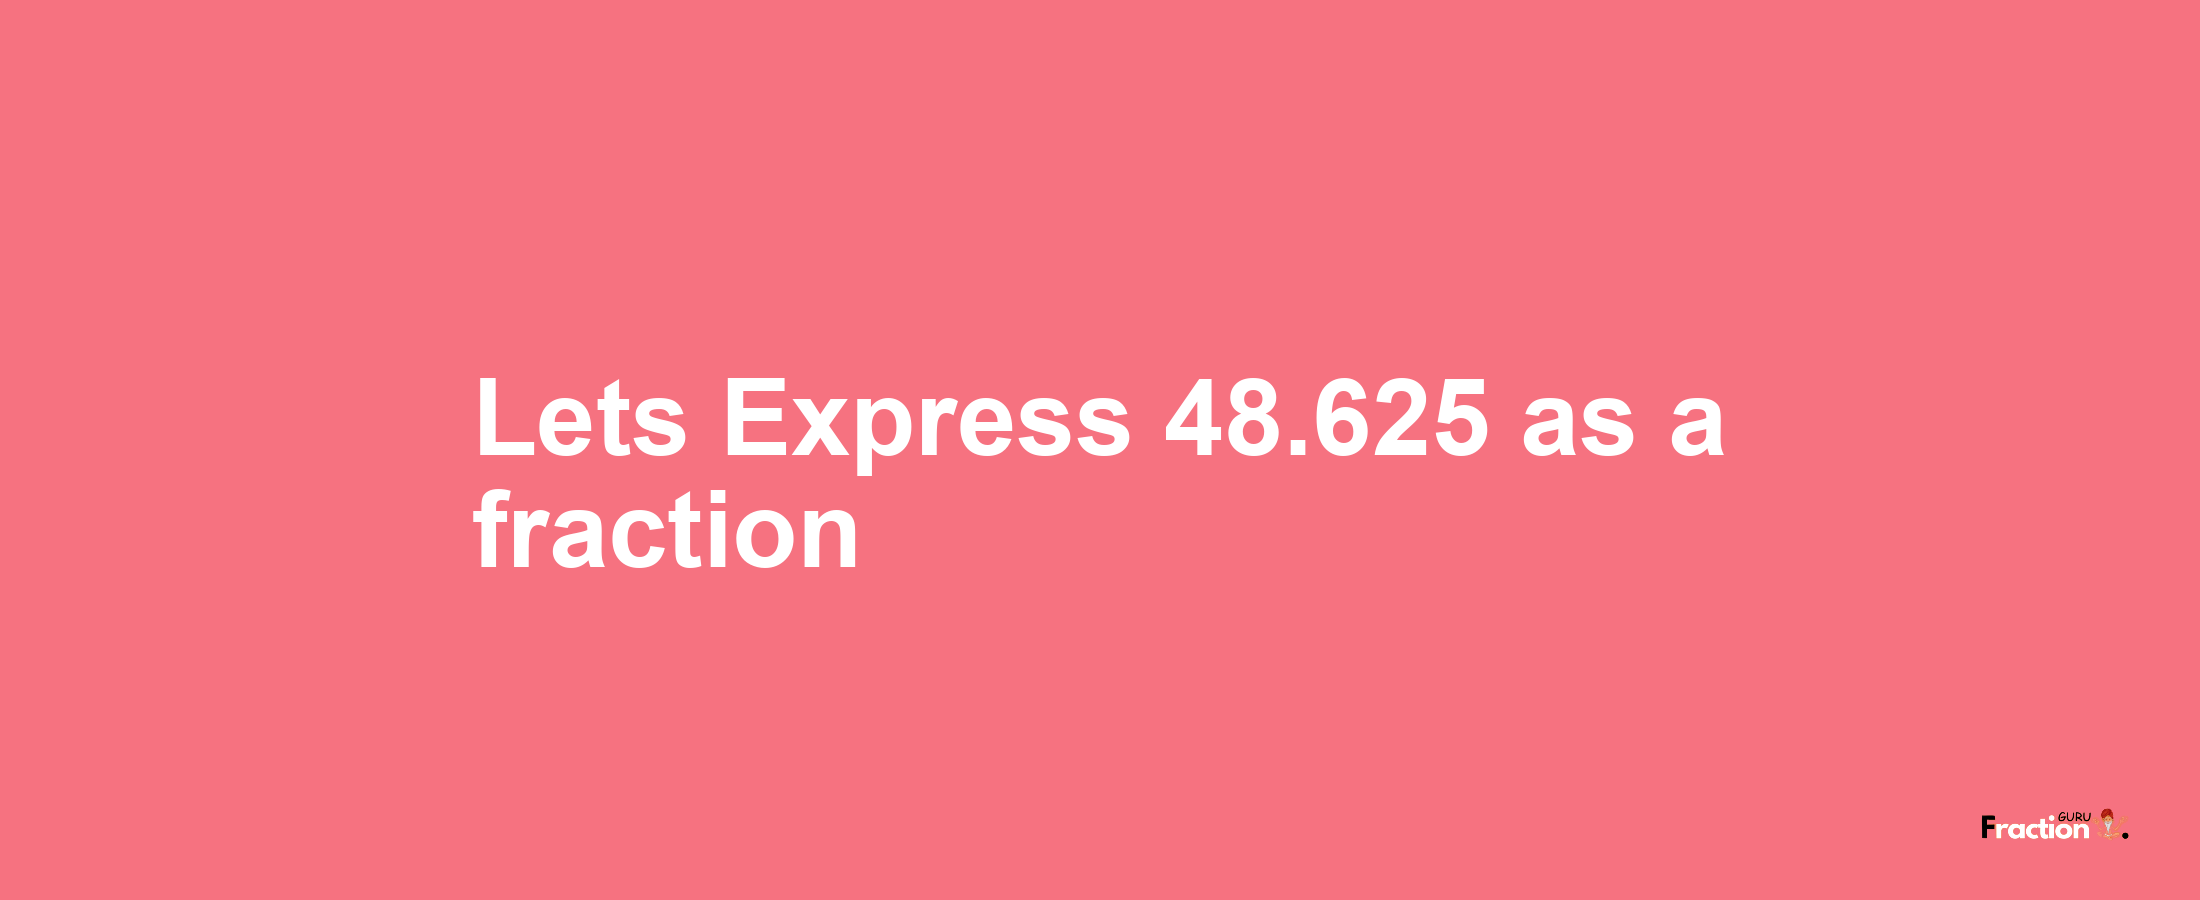 Lets Express 48.625 as afraction